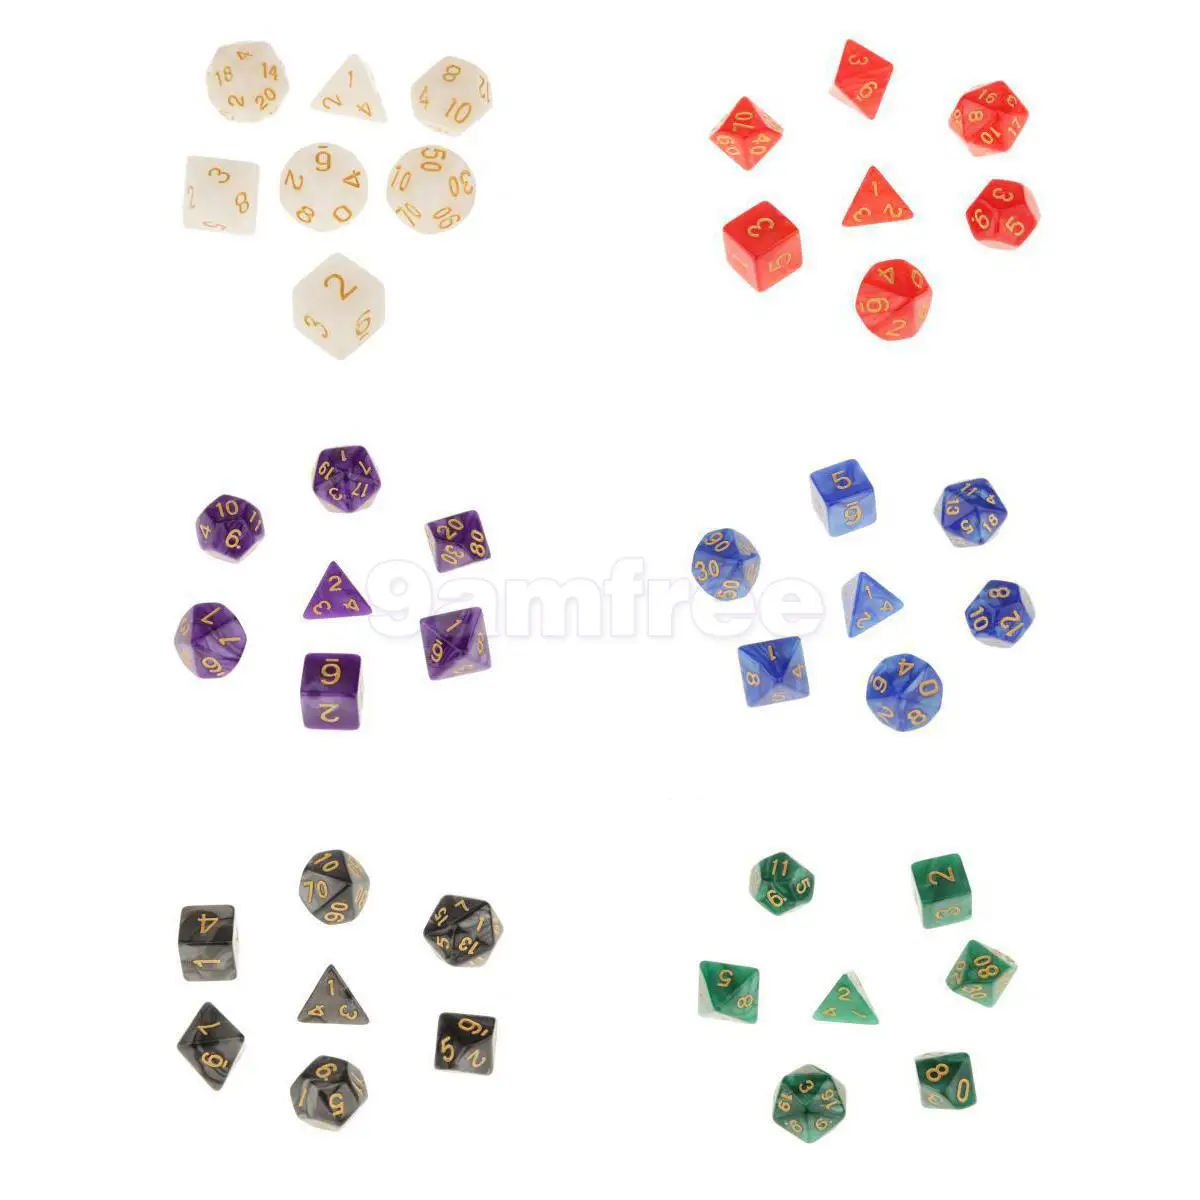 7pcs Multisided Acrylic Dices  D4-D20 Board Game Play Toy